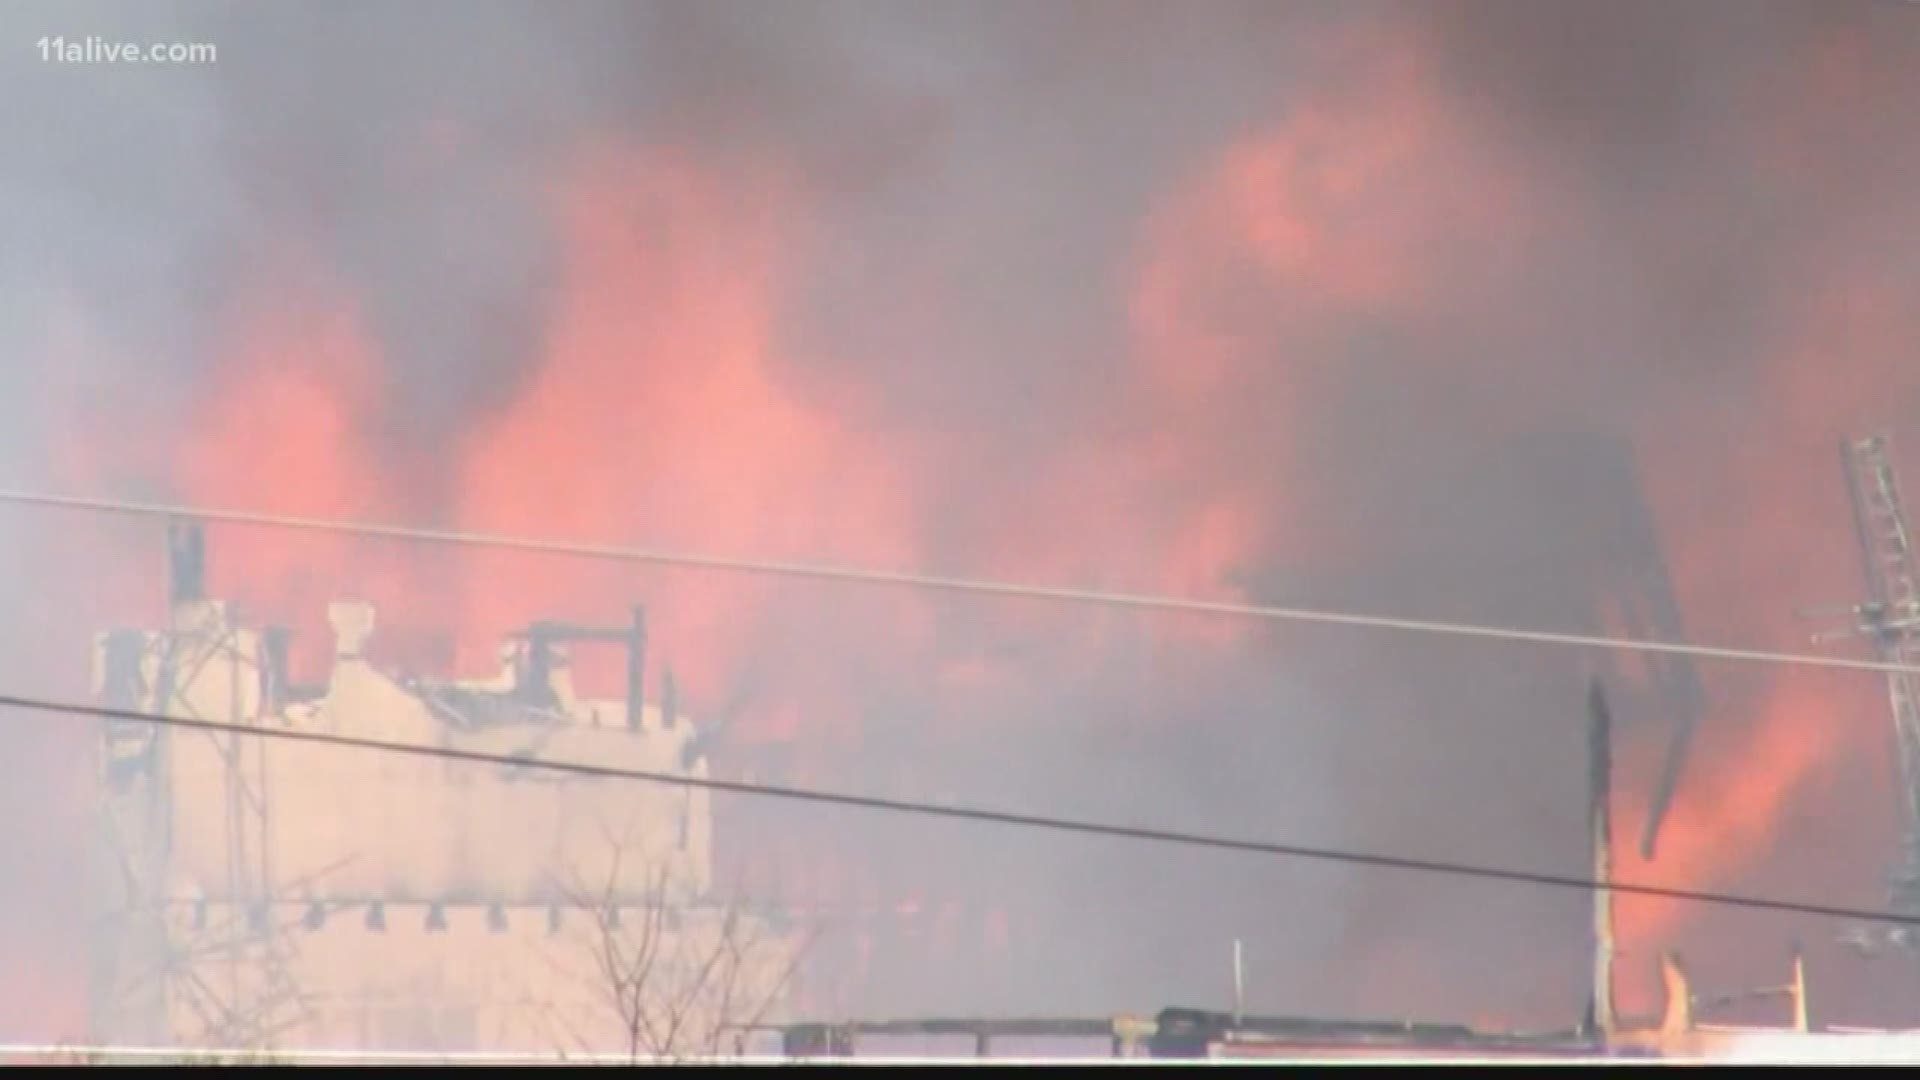 A multi-million dollar investment went up in flames in Downtown Savannah.